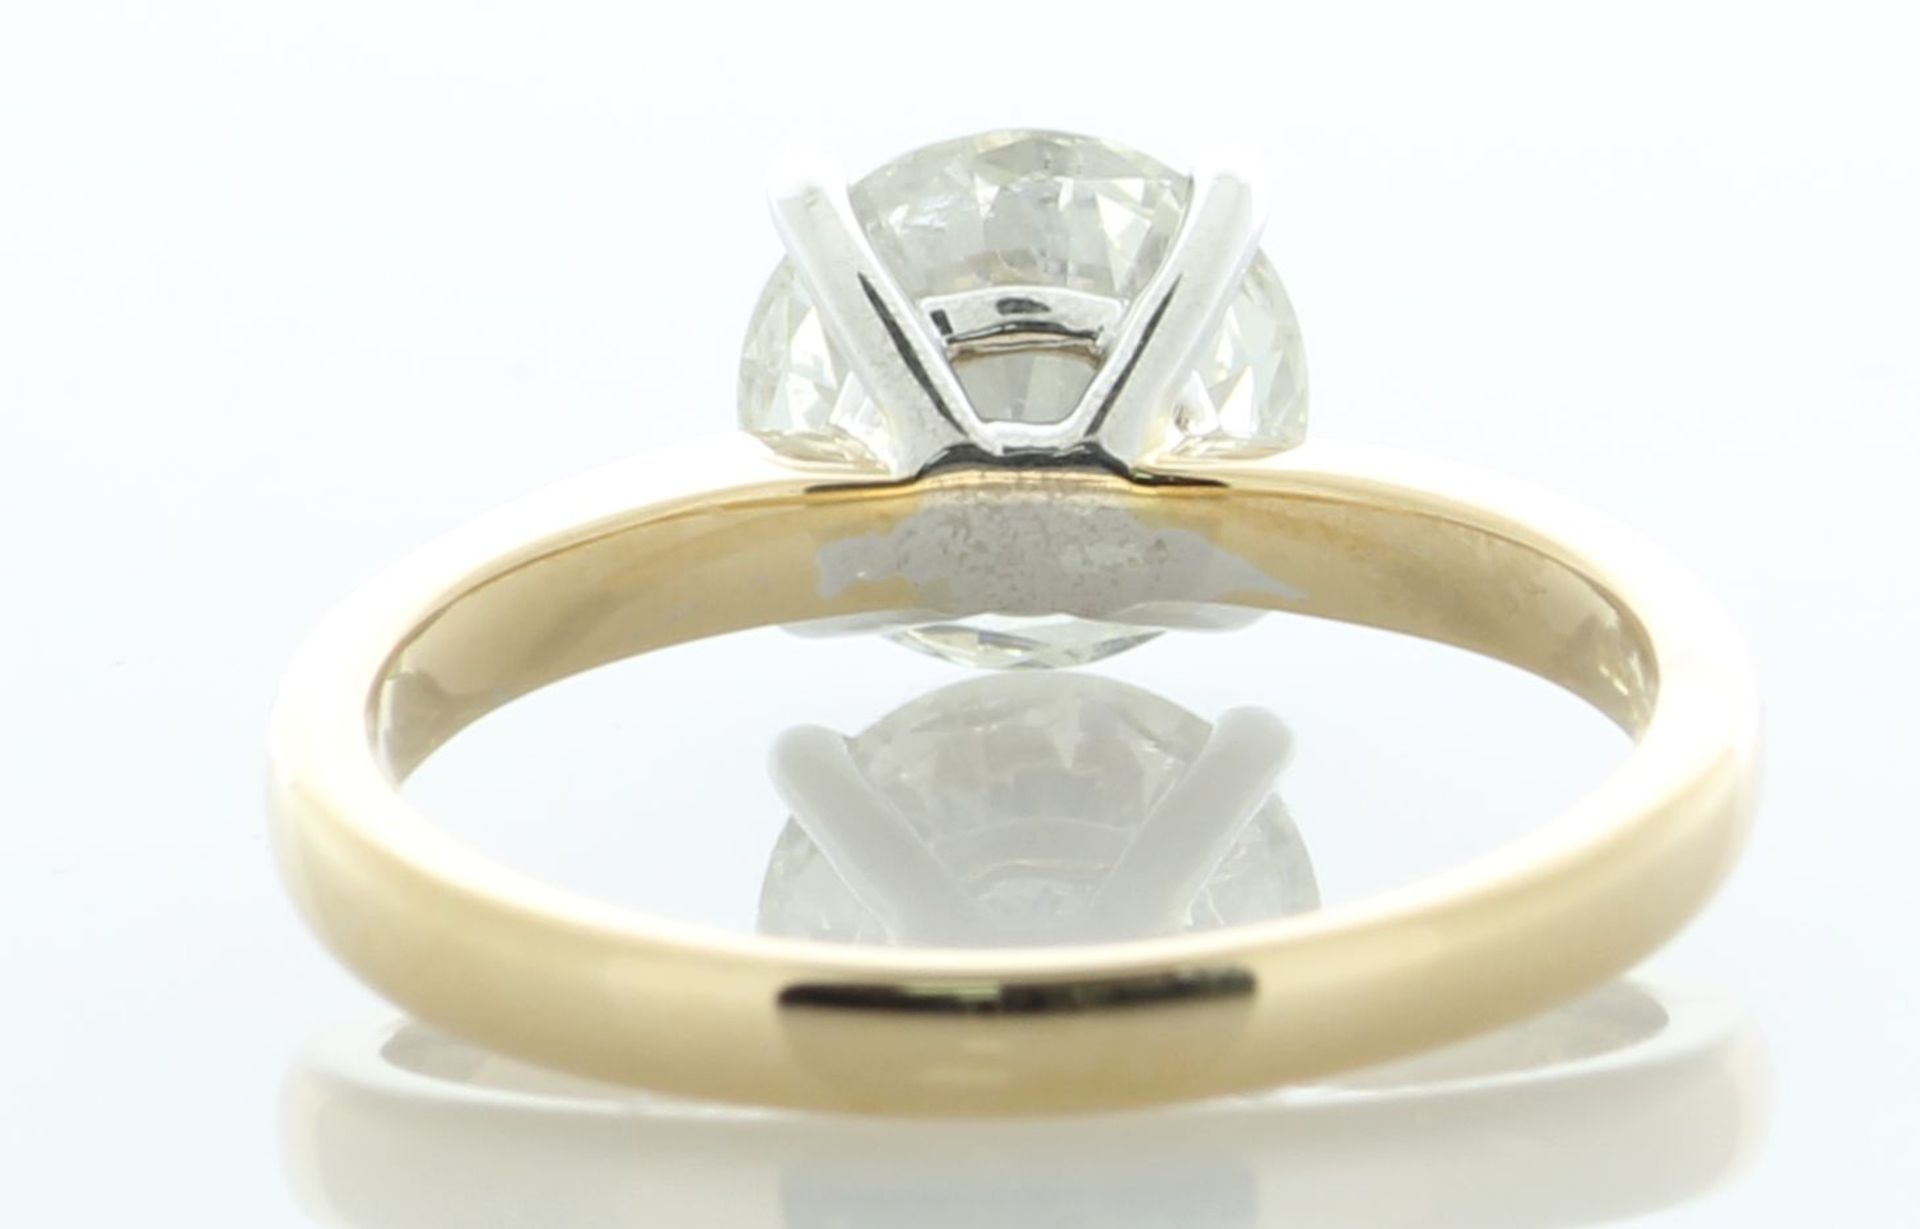 18ct Yellow Gold Single Stone Prong Set Diamond Ring 1.58 Carats - Valued By IDI £16,750.00 - A 1.58 - Image 4 of 5